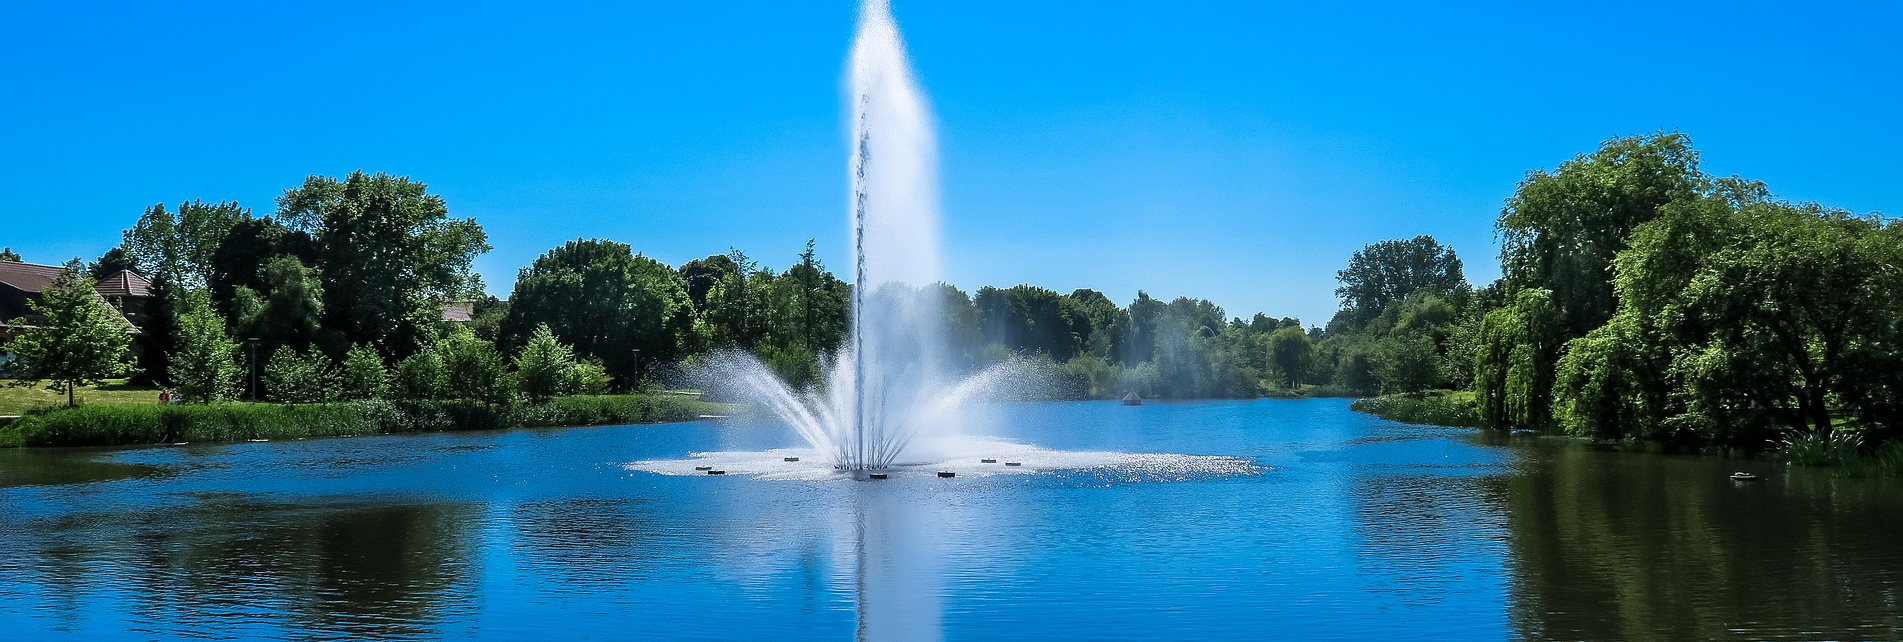 The Lake Doctor - lake management floating fountains Dallas Fort Worth Texas - Lake Management Company - Floating Fountains Aeration Systems Vegetation Control Fish Fish Feeders Installation & Design Prosper Texas